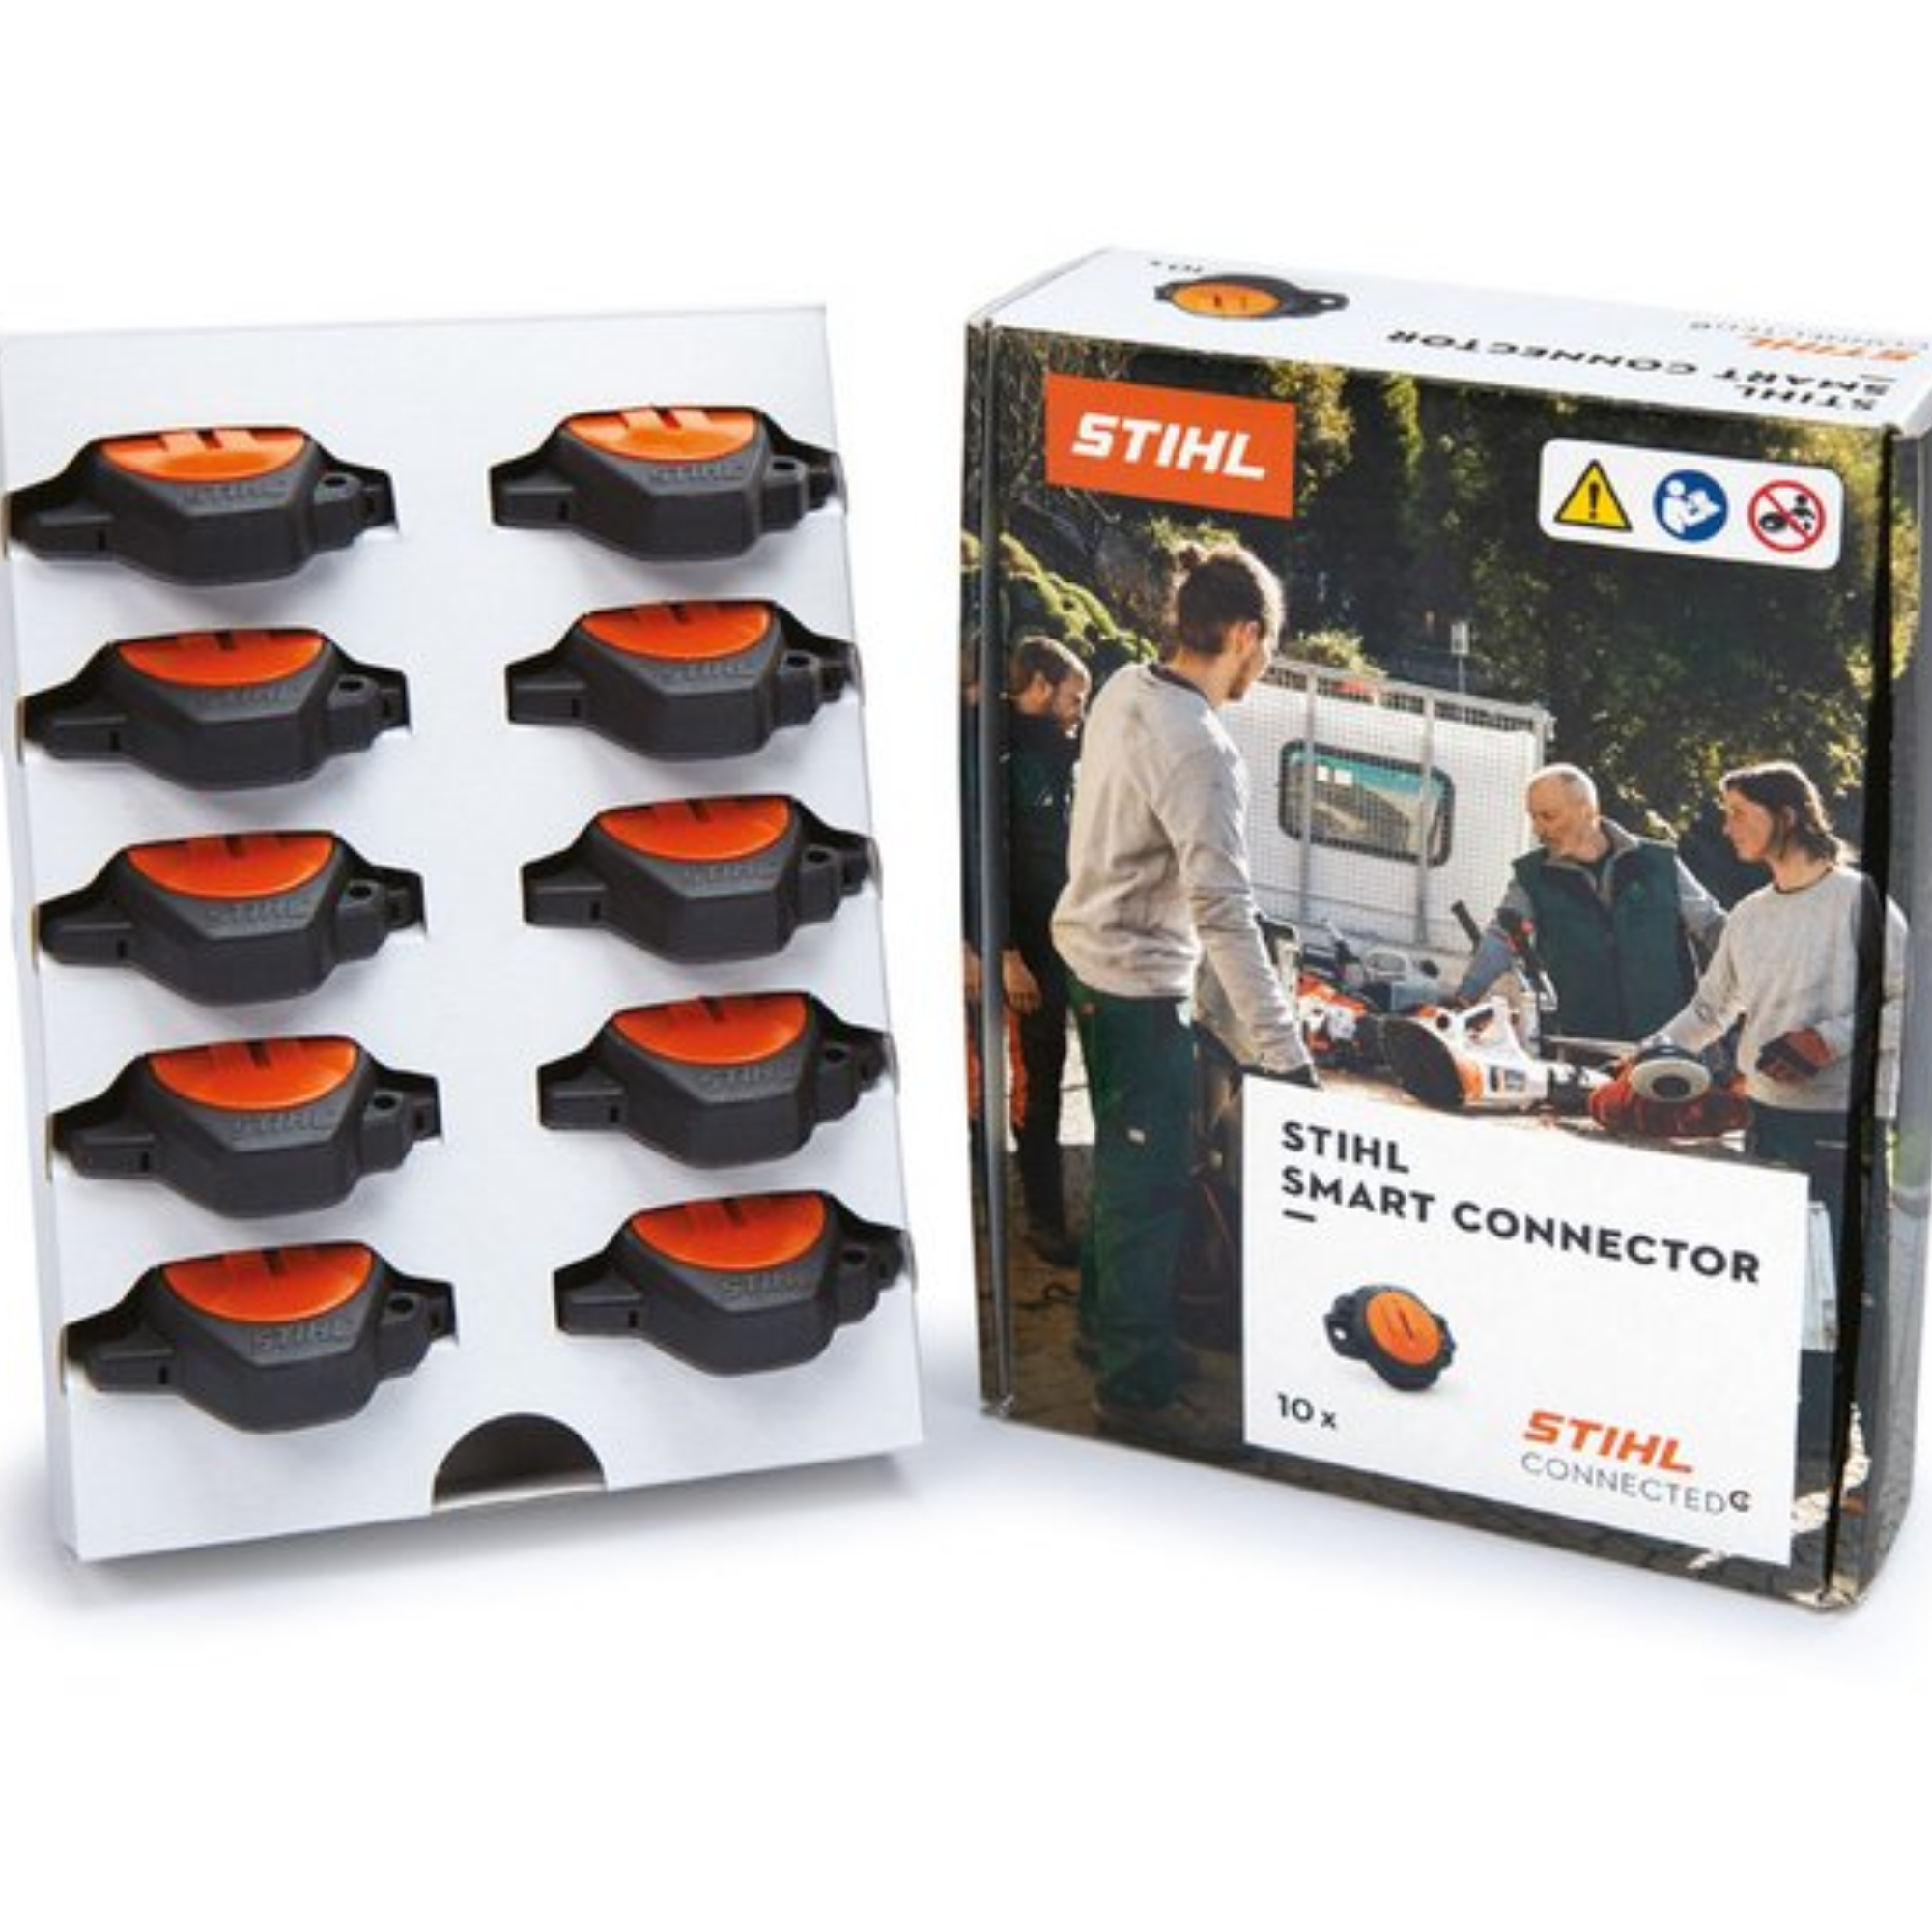 STIHL Smart Connector | 10 Pack | 0000 400 4904